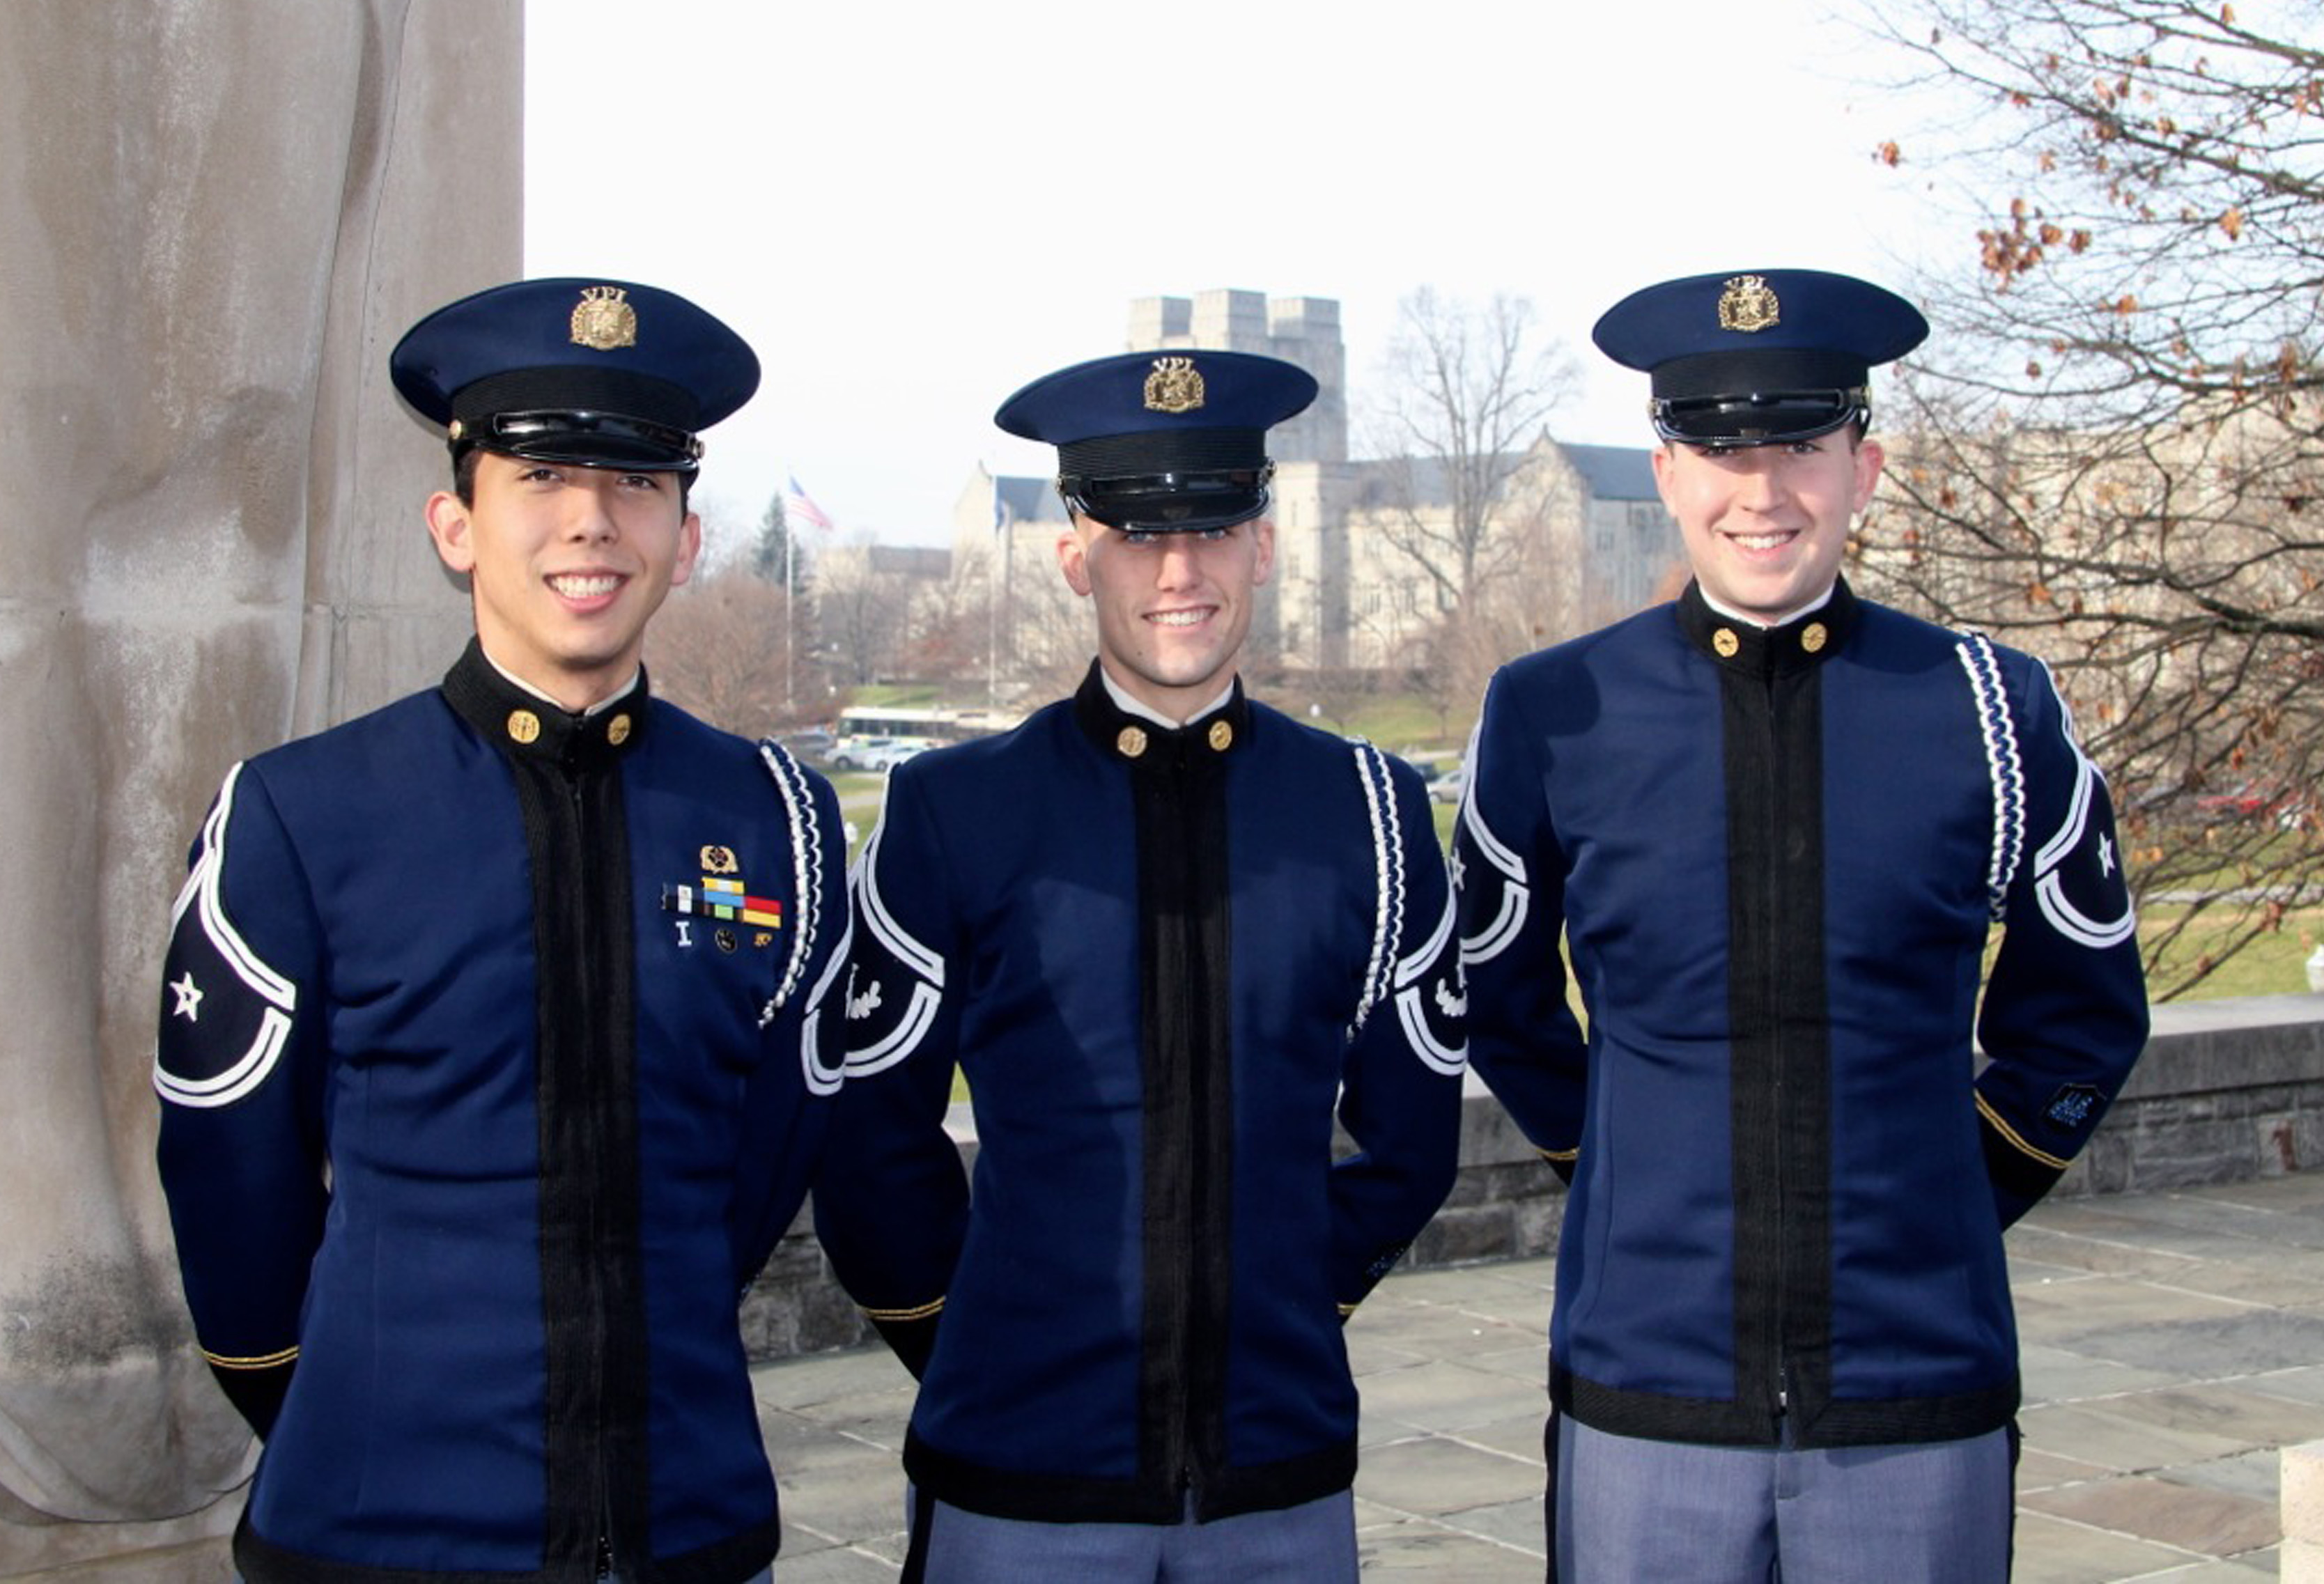 From left to right are Cadets Dustin Caranci, Austin Burns, and Brett Cowell standing at the Pylons